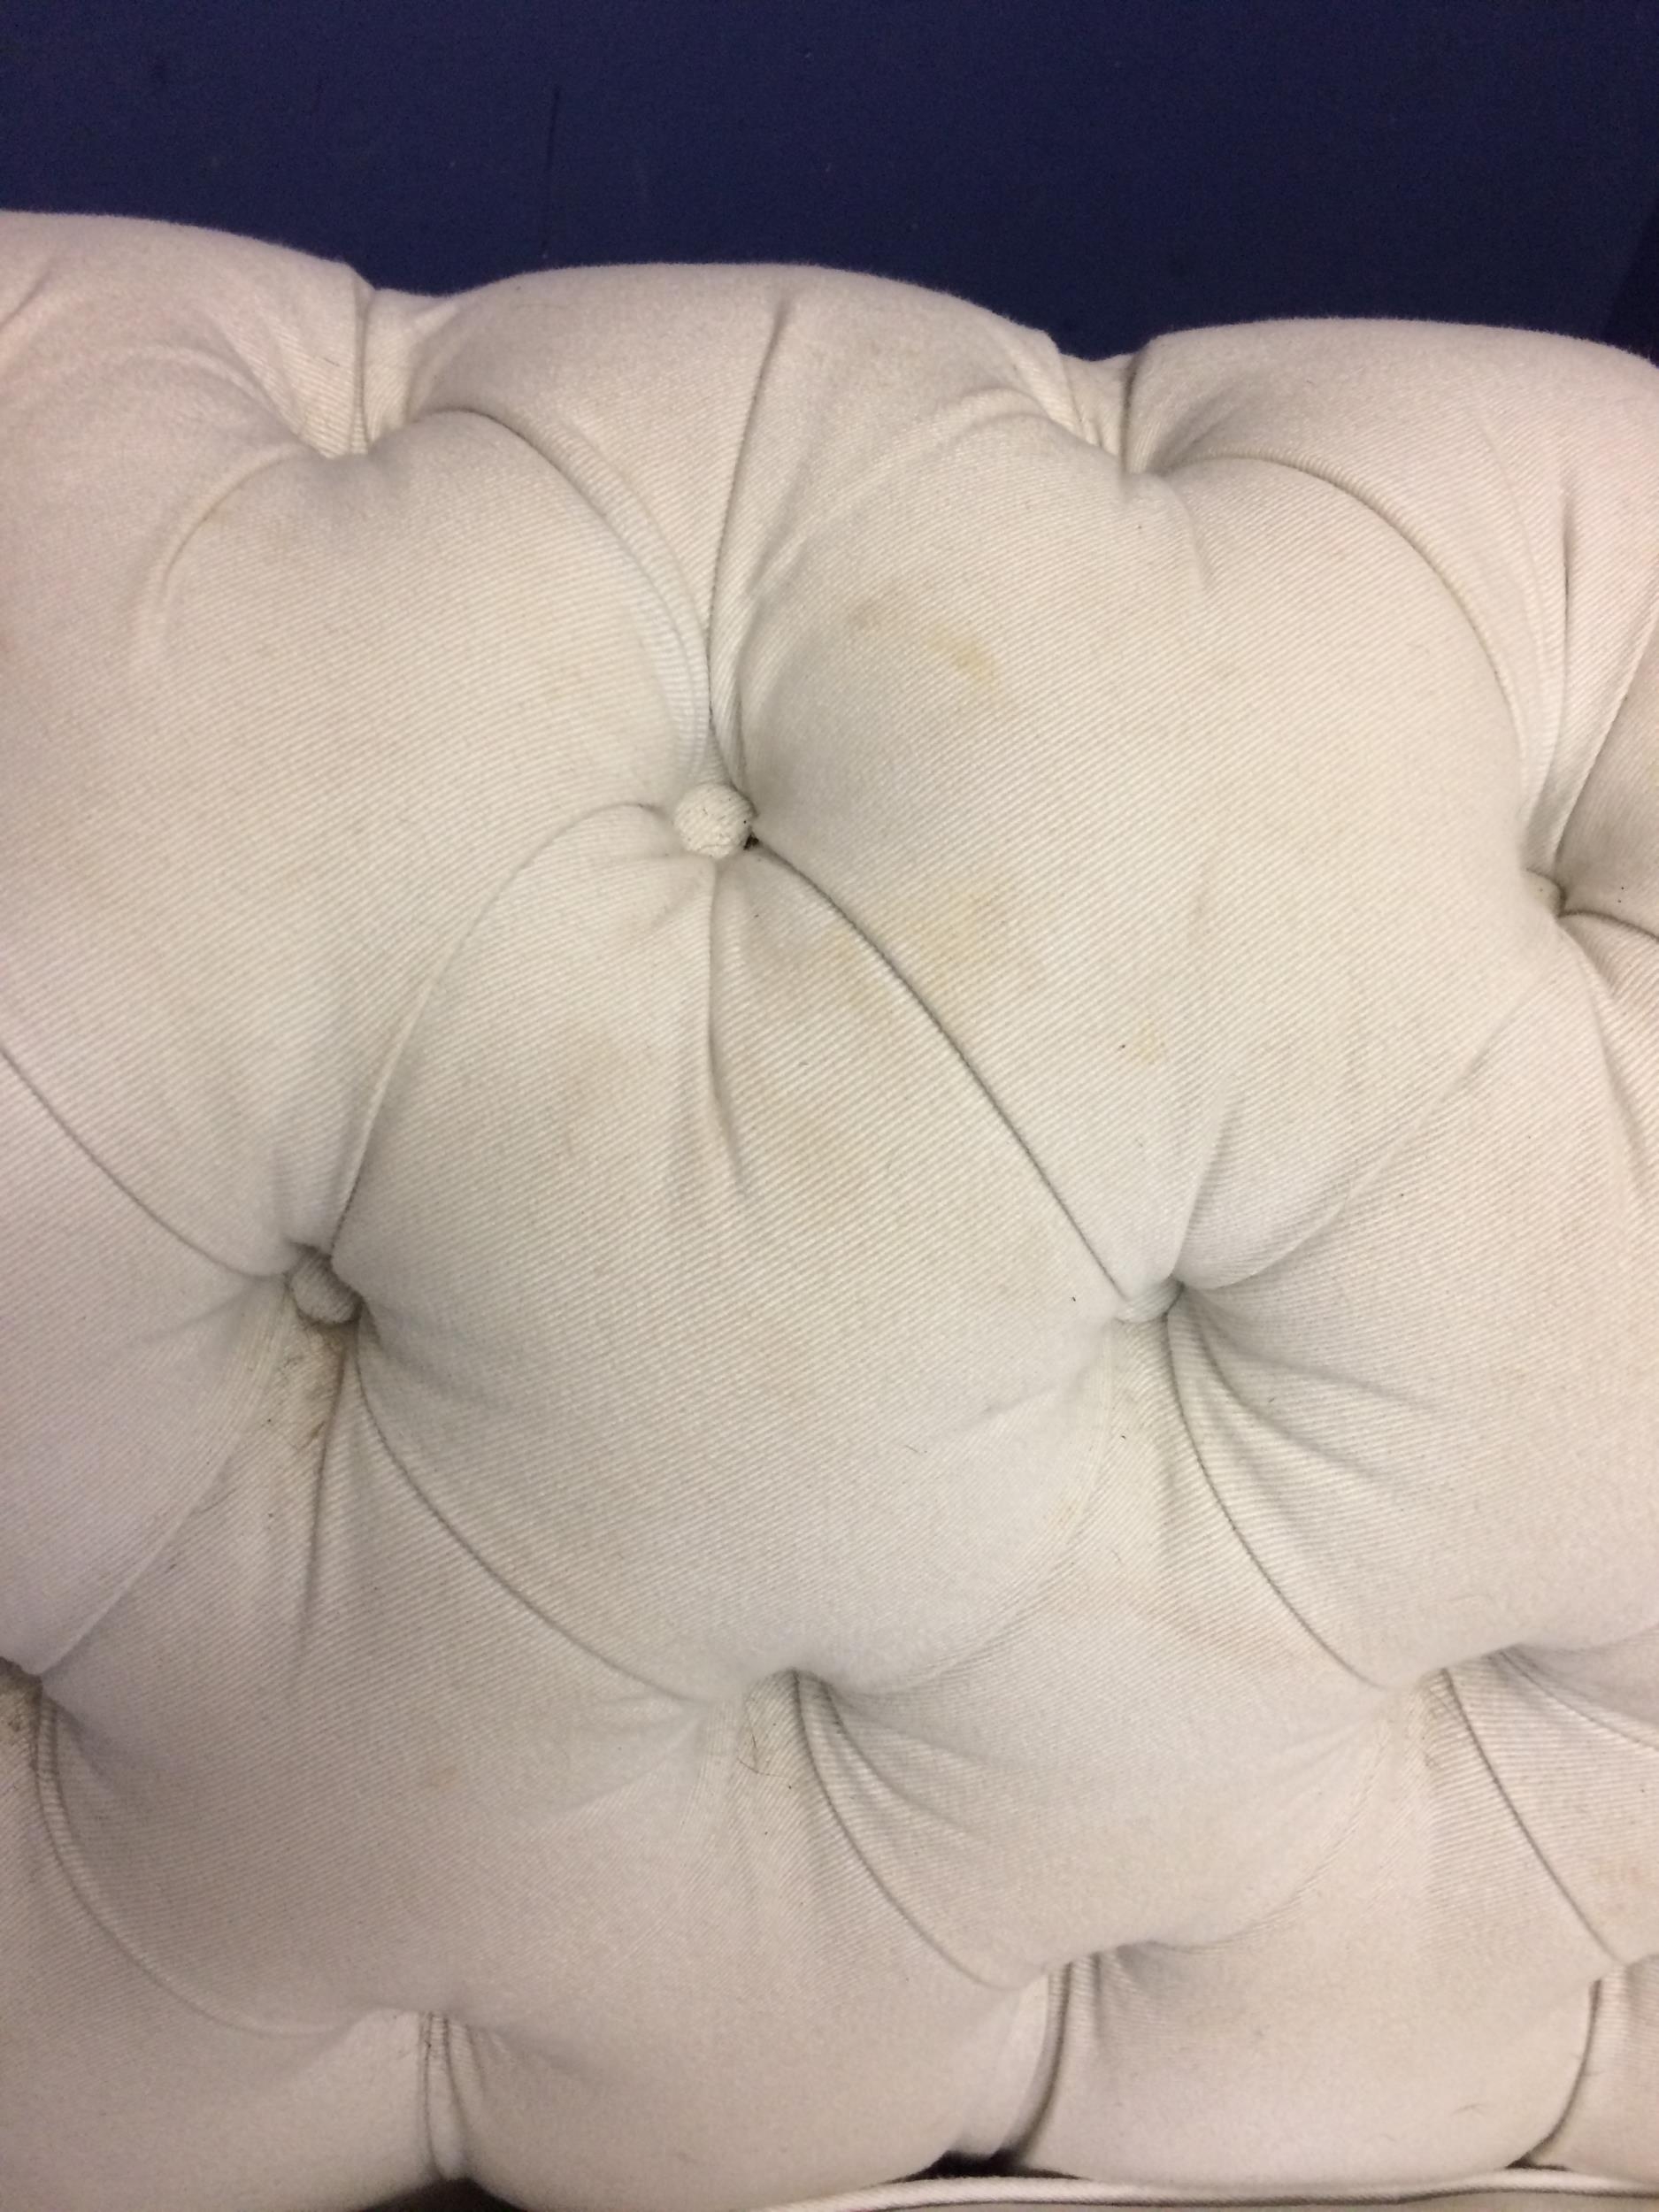 Victorian chesterfield sofa, upholstered in a light coloured fabric (some areas grubby with marks, - Image 4 of 5